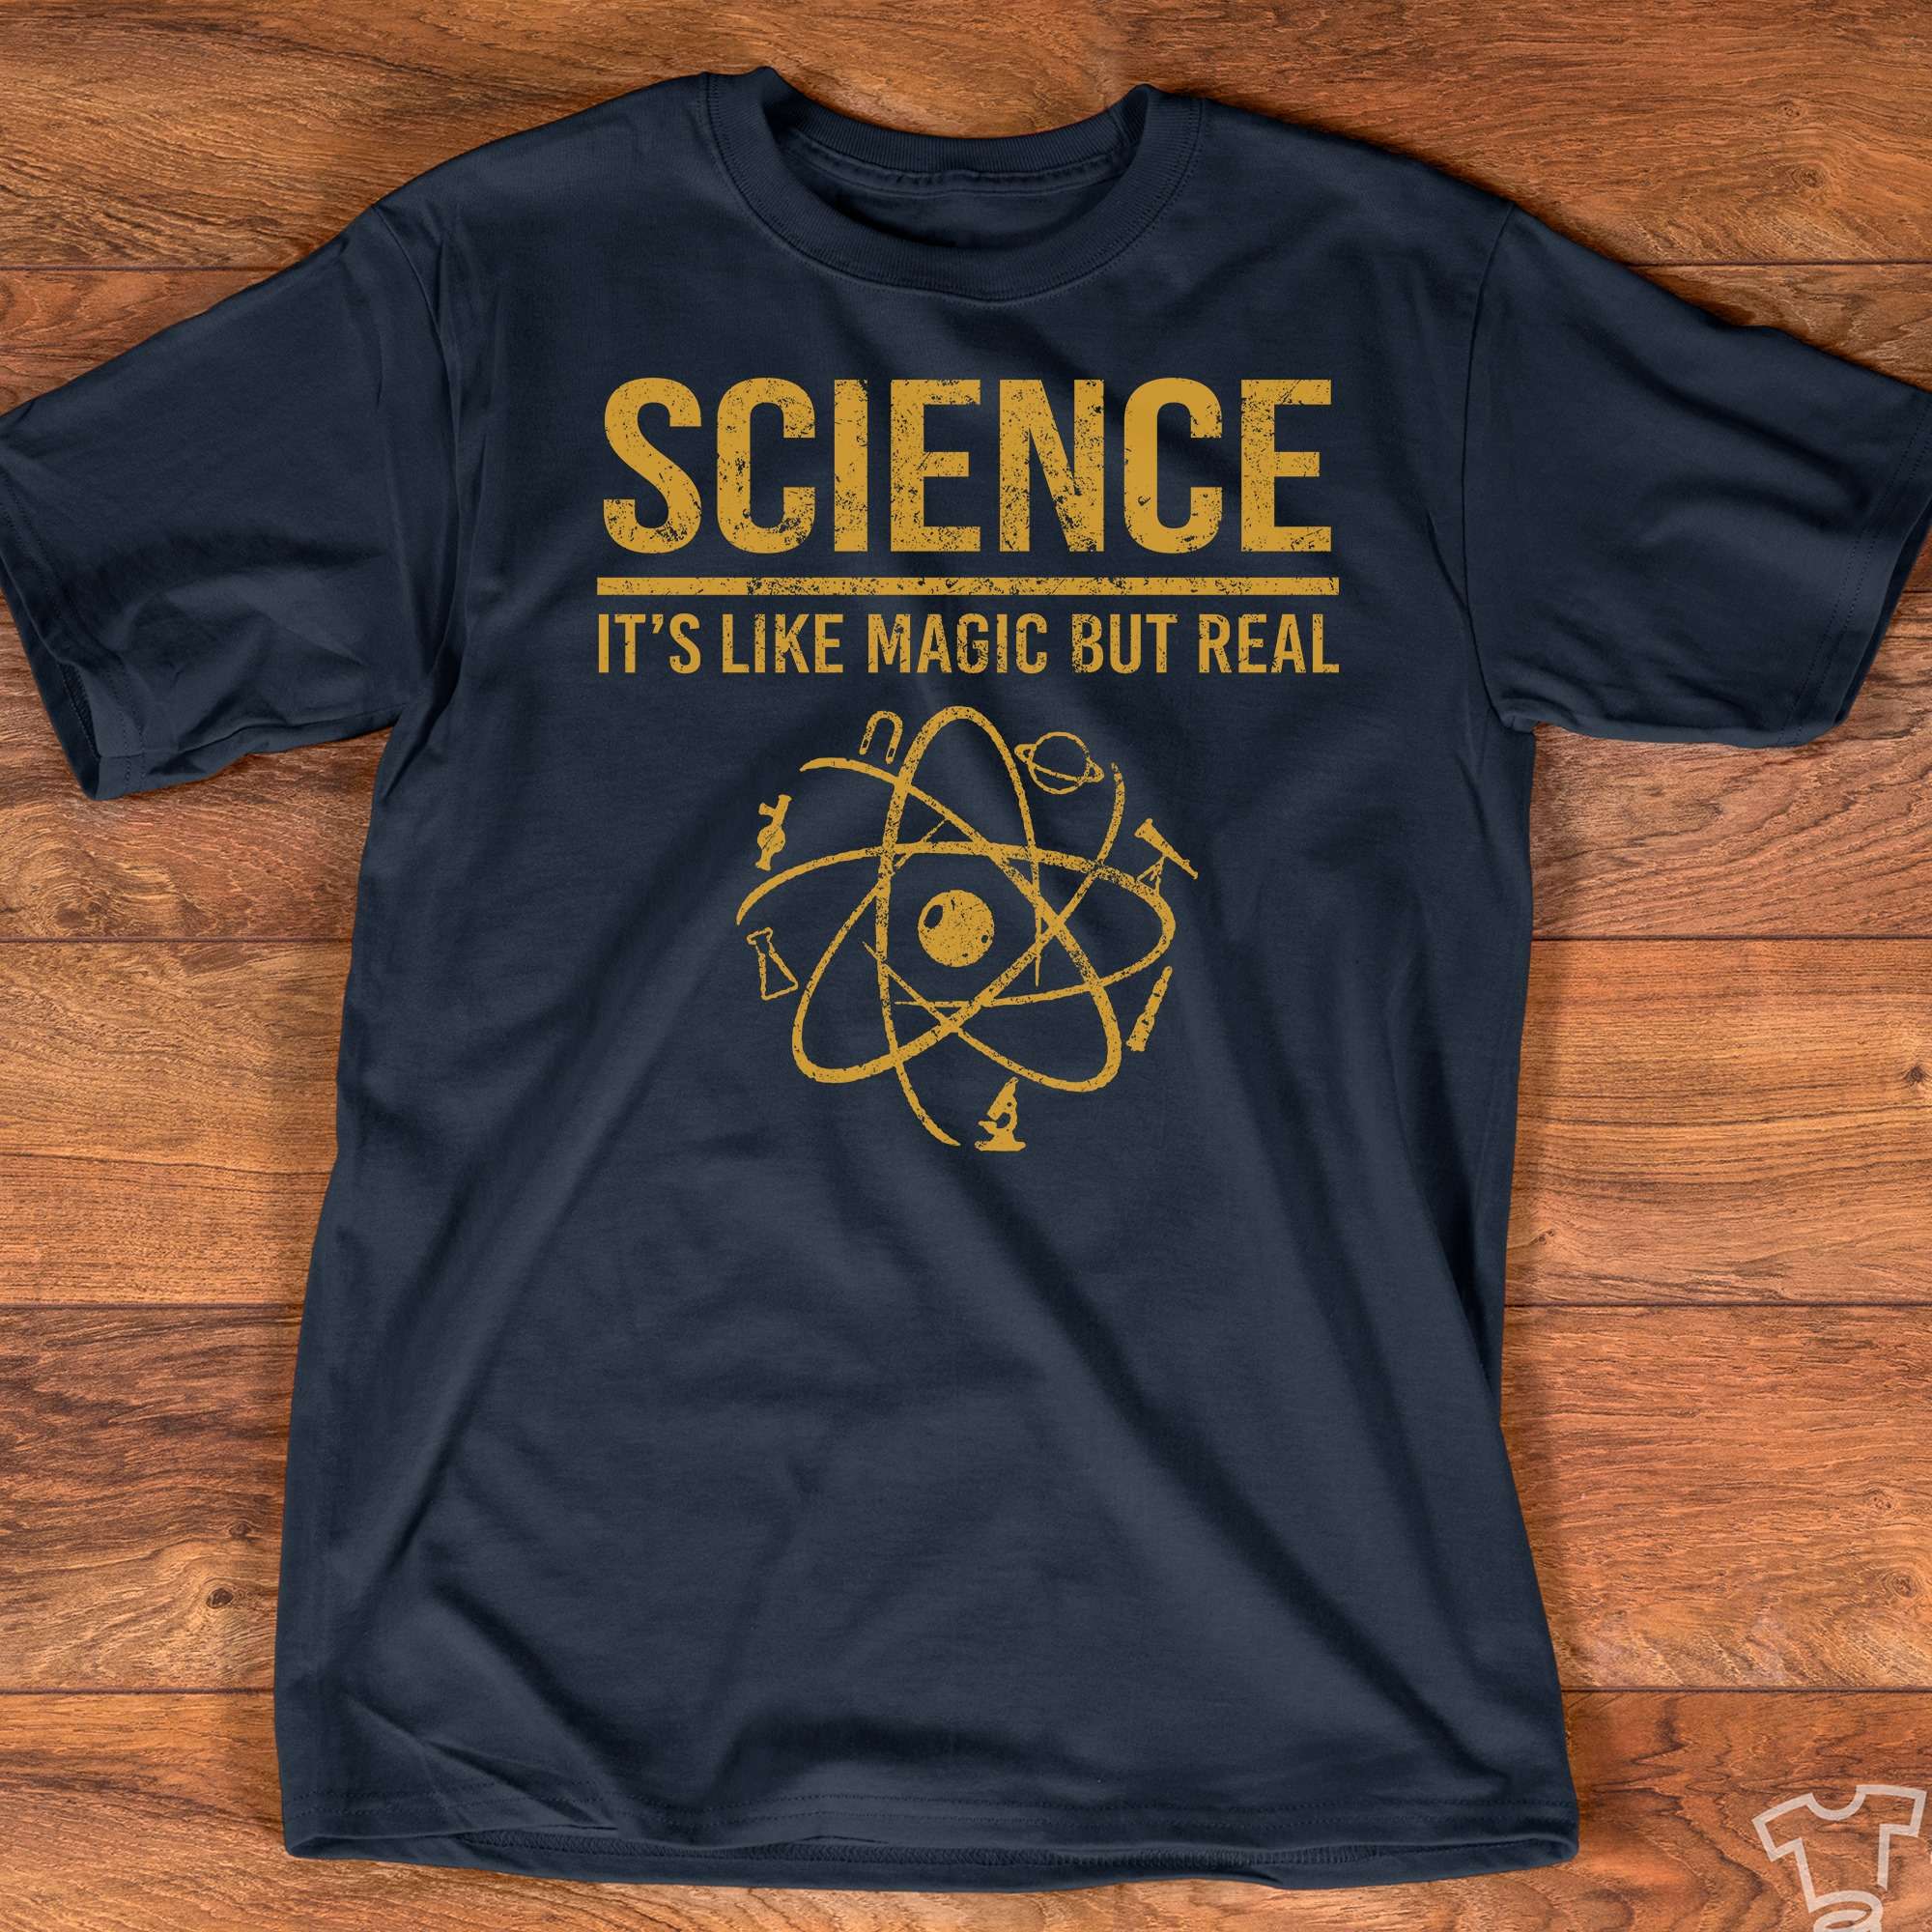 Science it's like magic but real - Science the knowledge, real magic